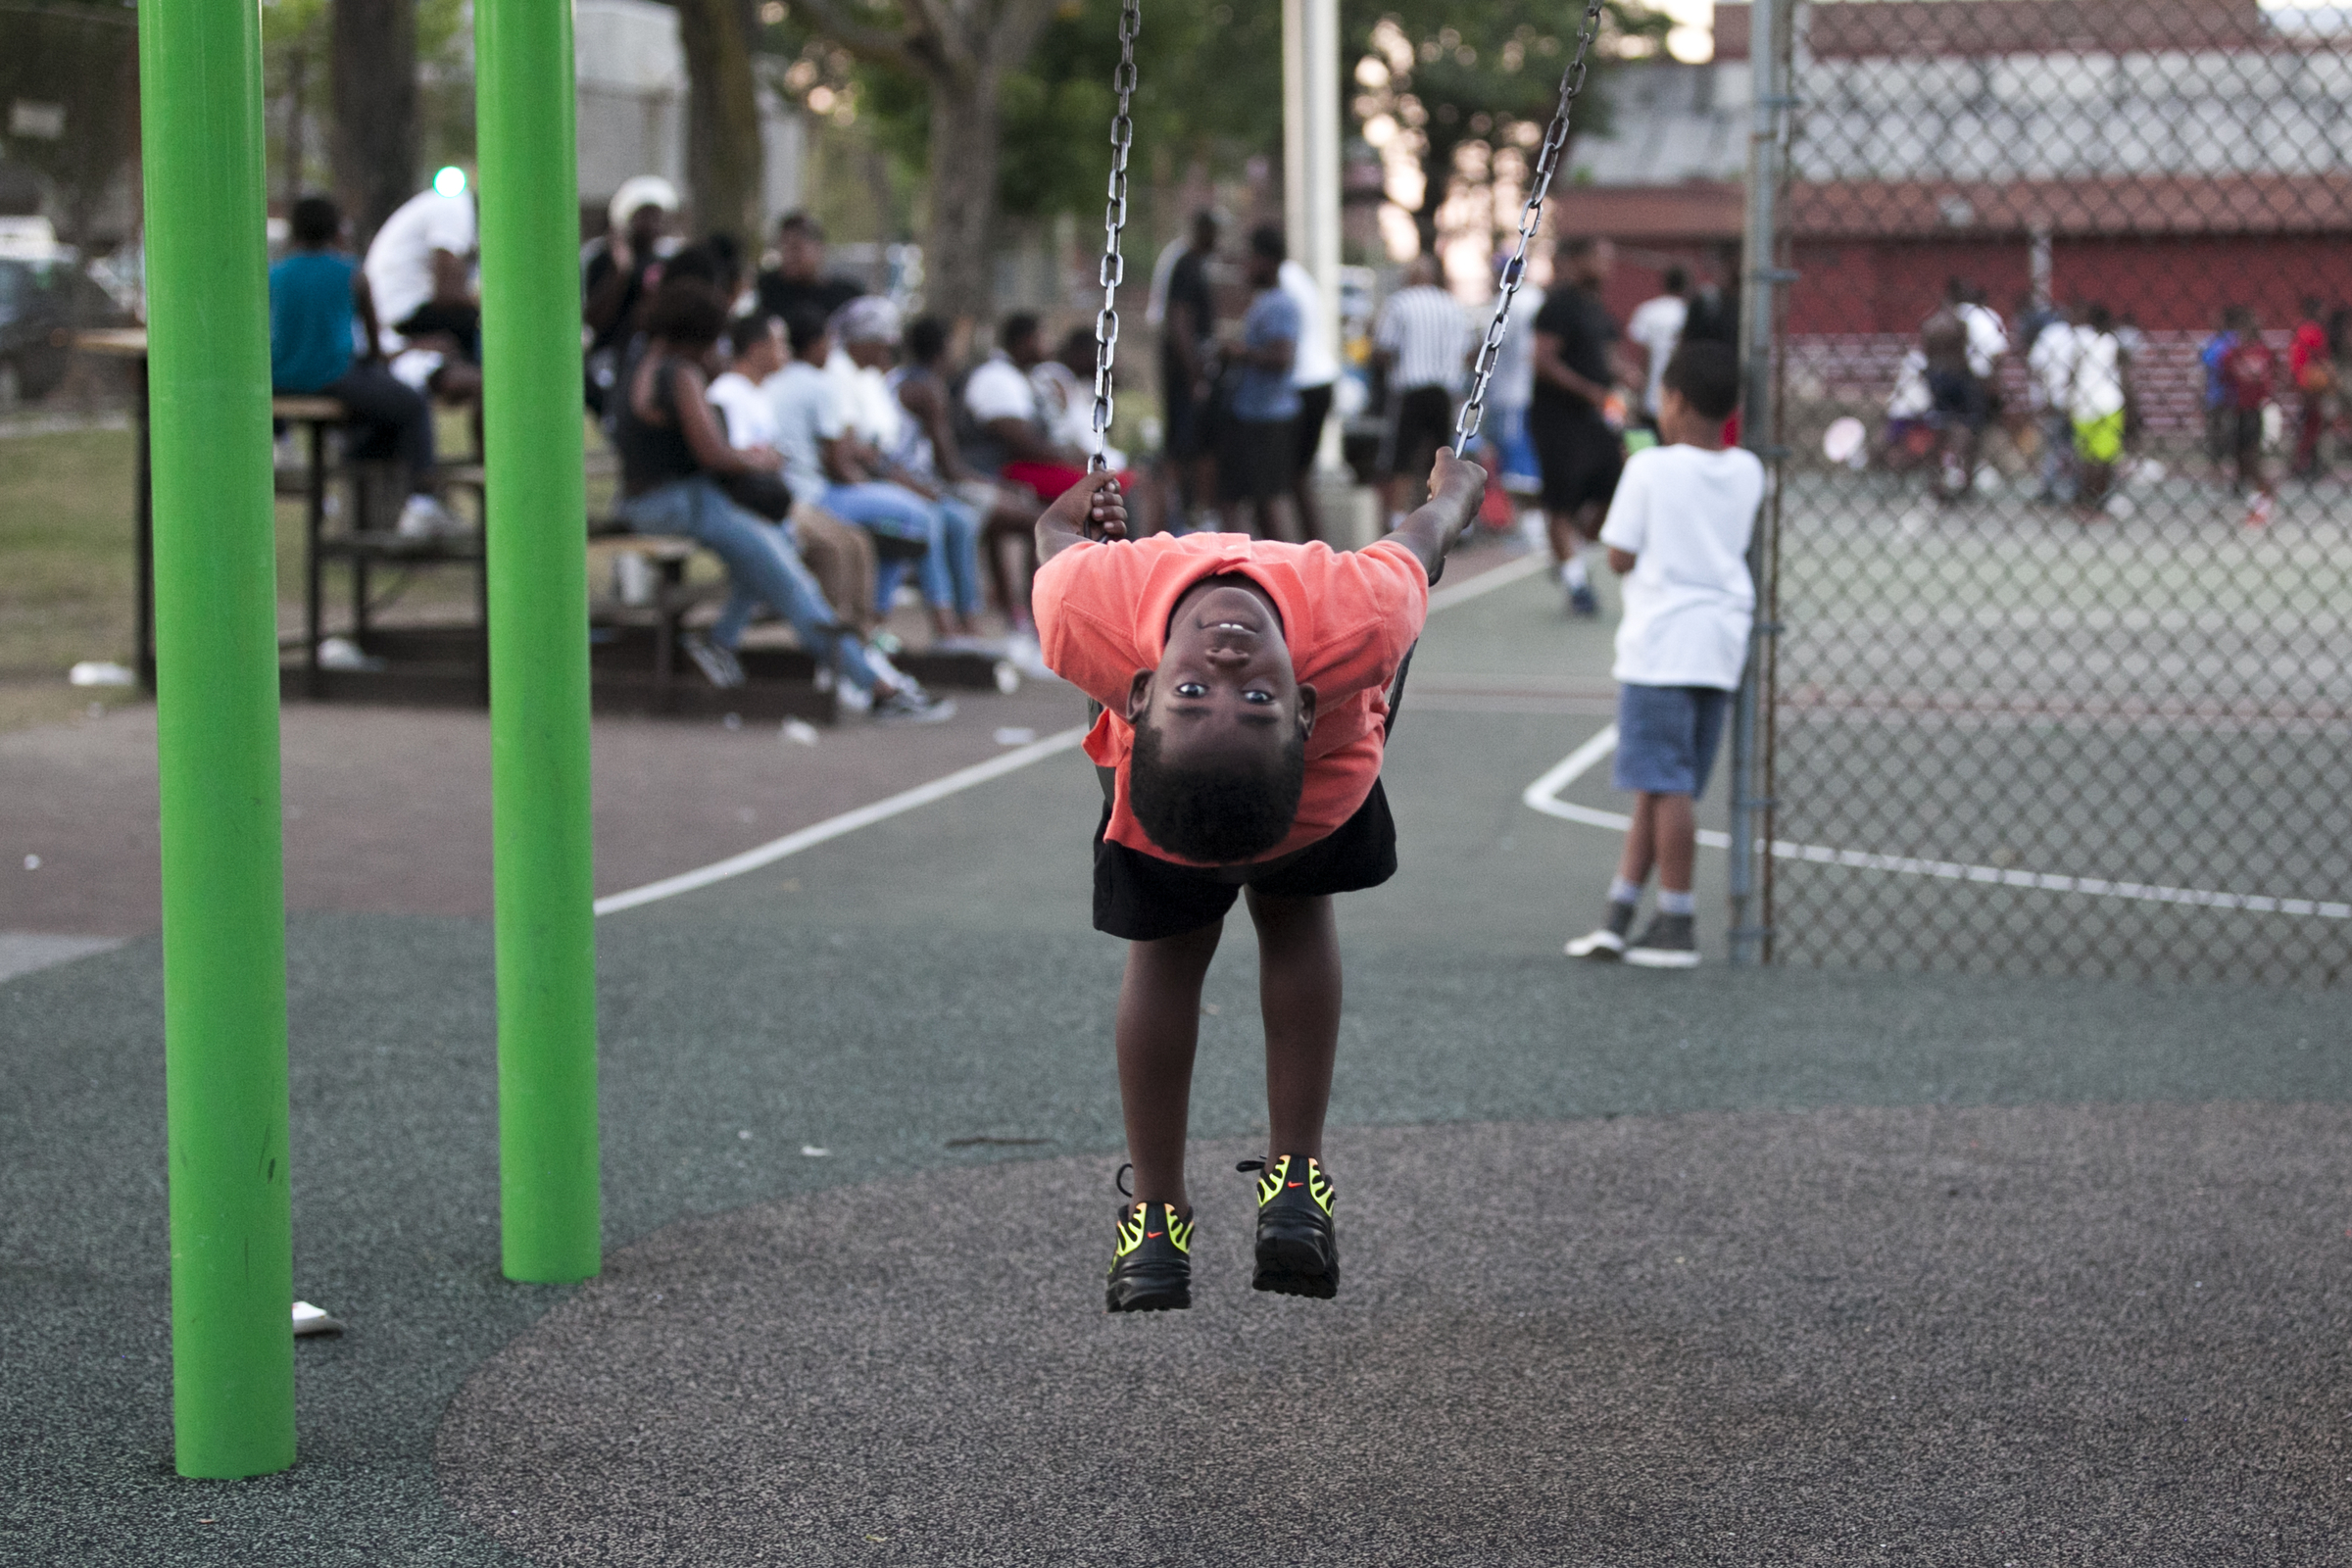 A young Philadelphia looks backwards from his swing at Dendy Playground on the evening of Wednesday, July 18, 2018. | Maggie Loesch for PlanPhilly